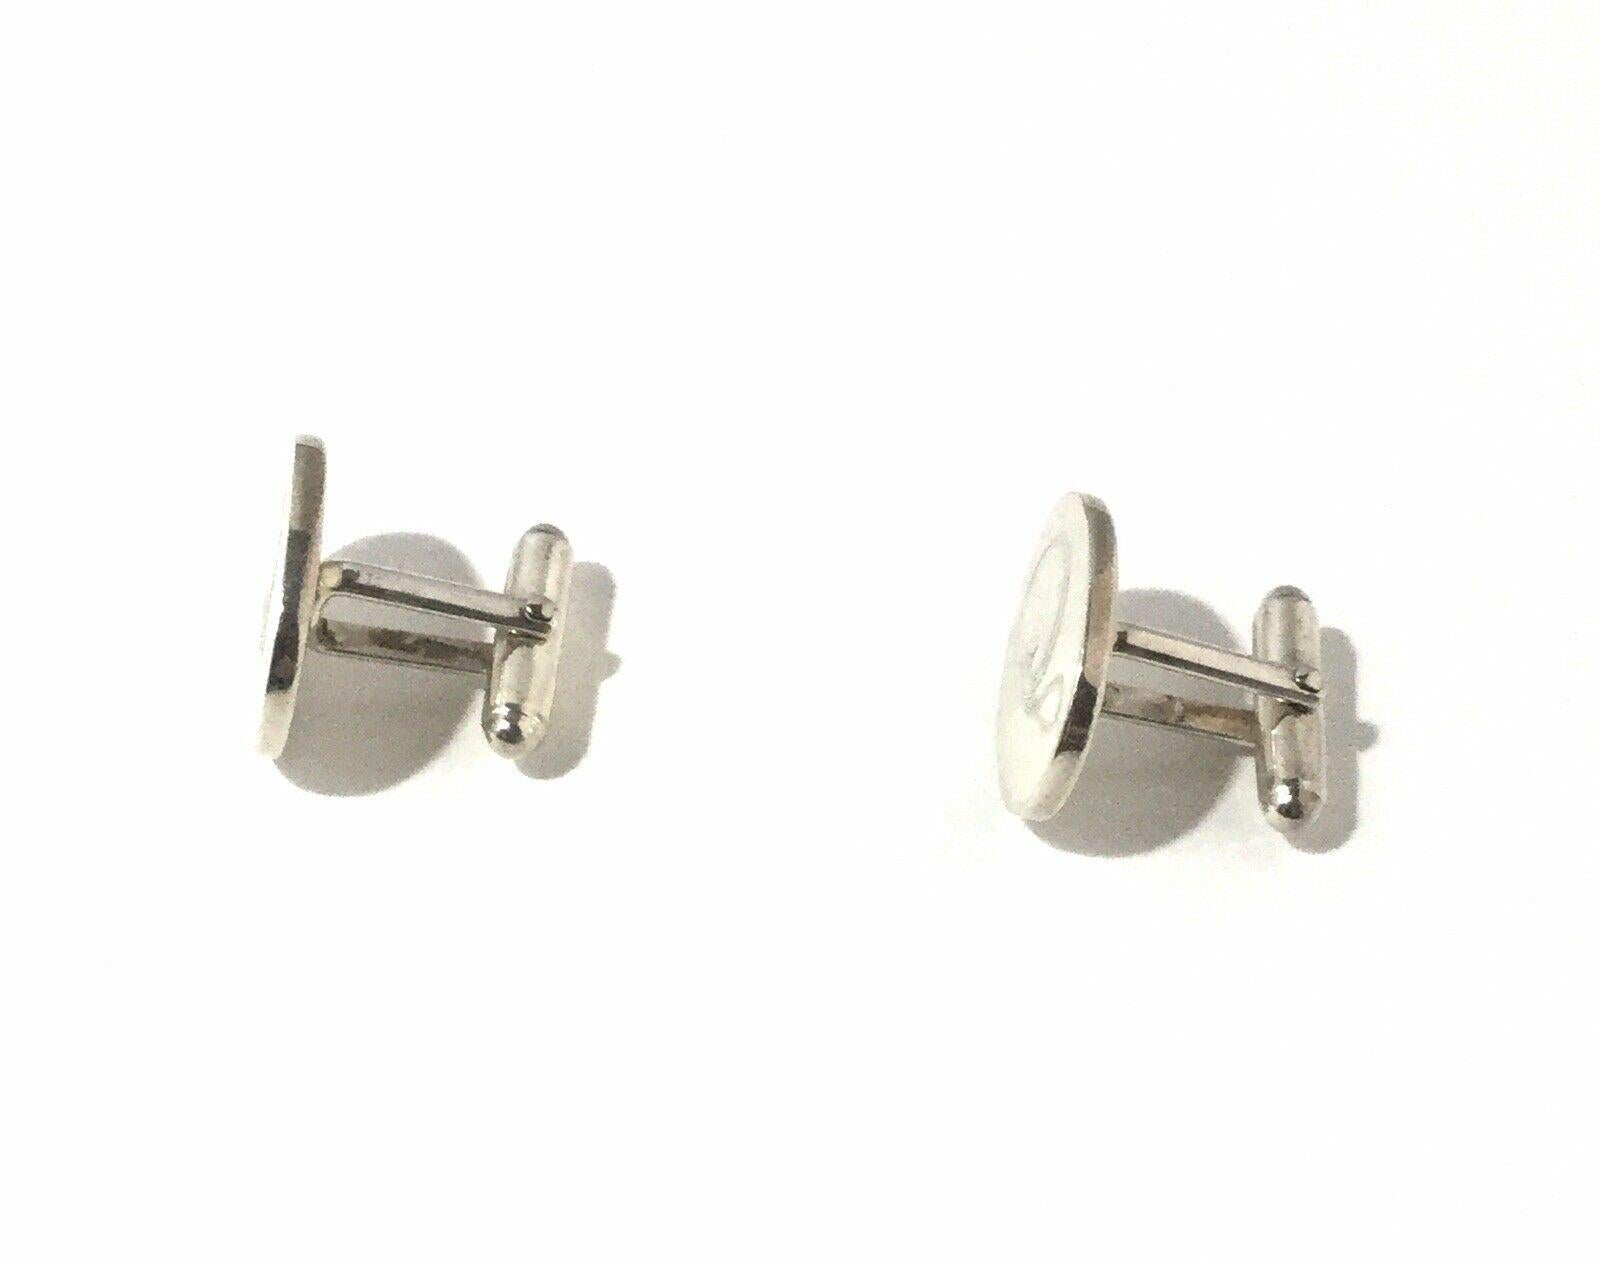 Tiffany & Co Sterling Silver Stethoscope Cufflinks

This is a charming pair of sterling silver stethoscope cufflinks designed by Tiffany & Co.  The perfect gift for a nurse, doctor or anyone in medical profession!!

Measurements:  Cufflinks in the